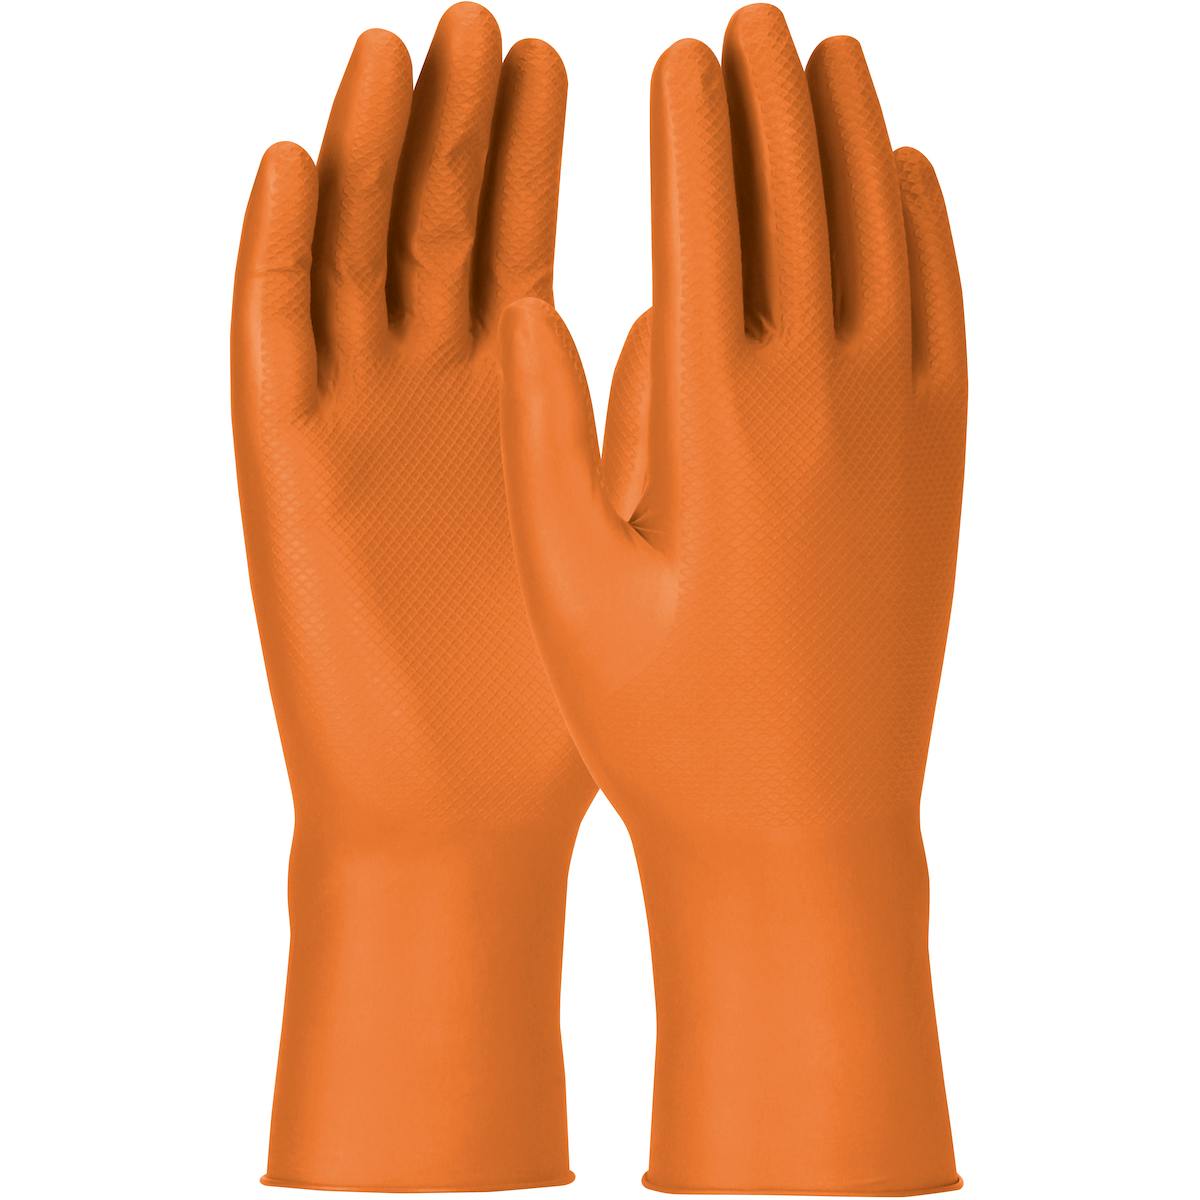 Grippaz™ Engage Extended Use Ambidextrous Nitrile Glove with Textured Fish Scale Grip - 7 Mil (67-307)_1